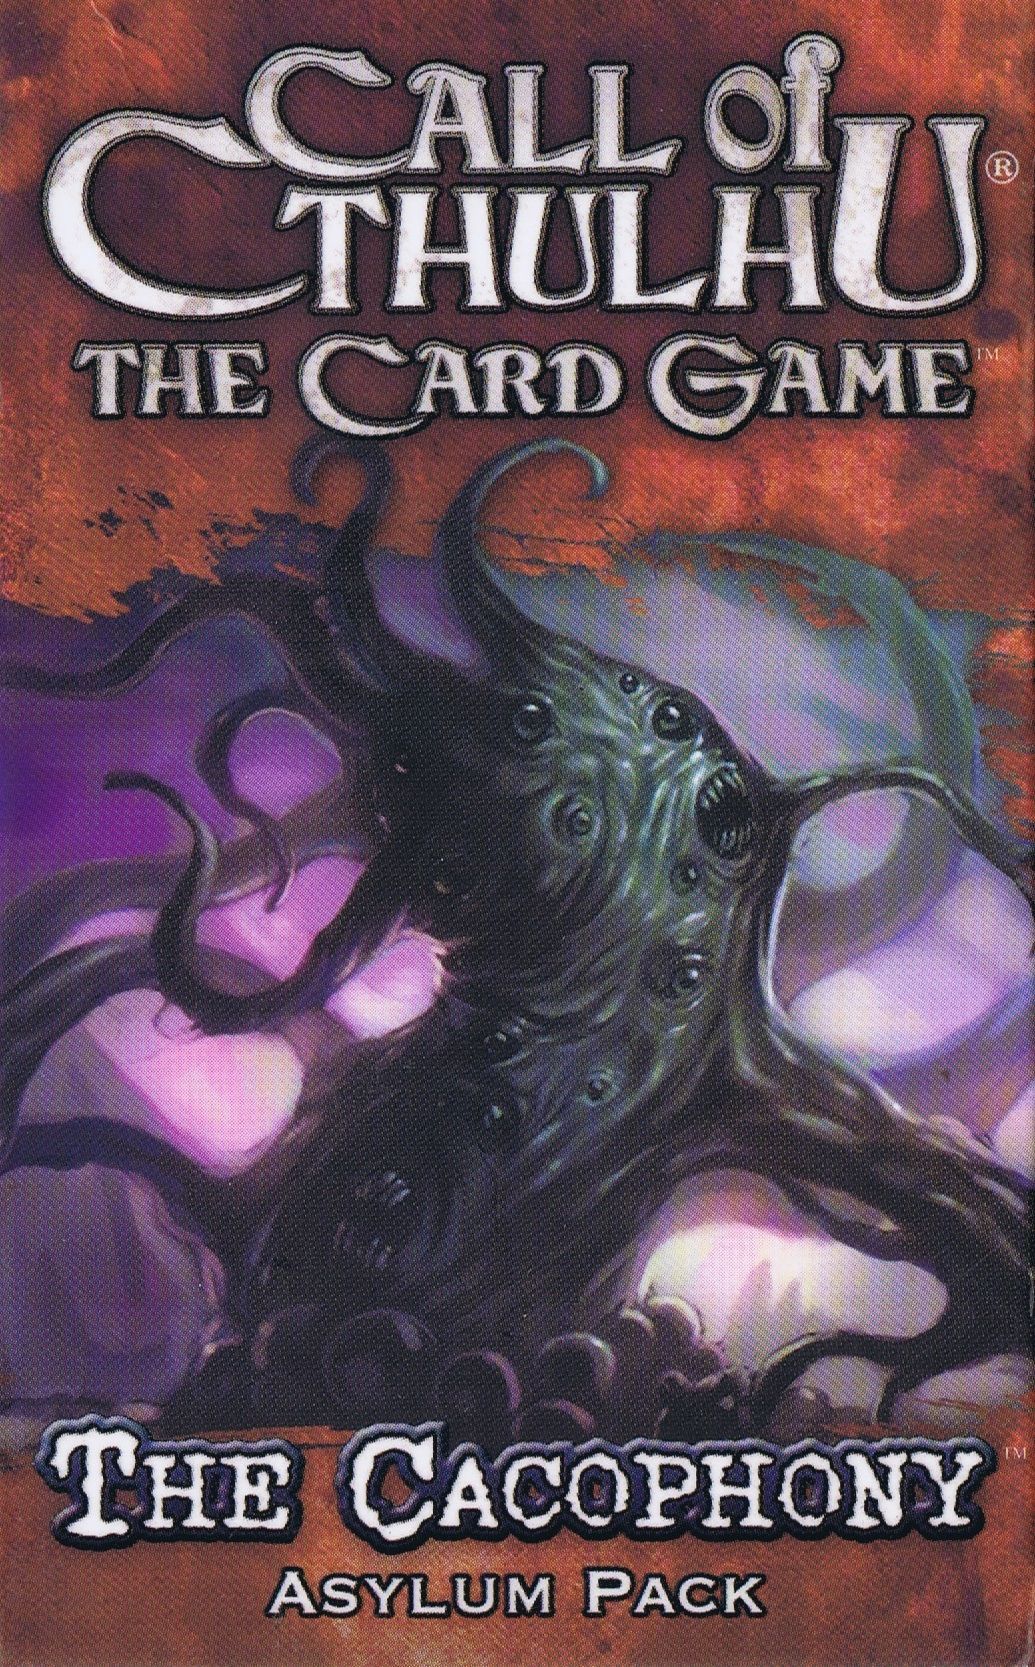 Call of Cthulhu: The Card Game – The Cacophony Asylum Pack